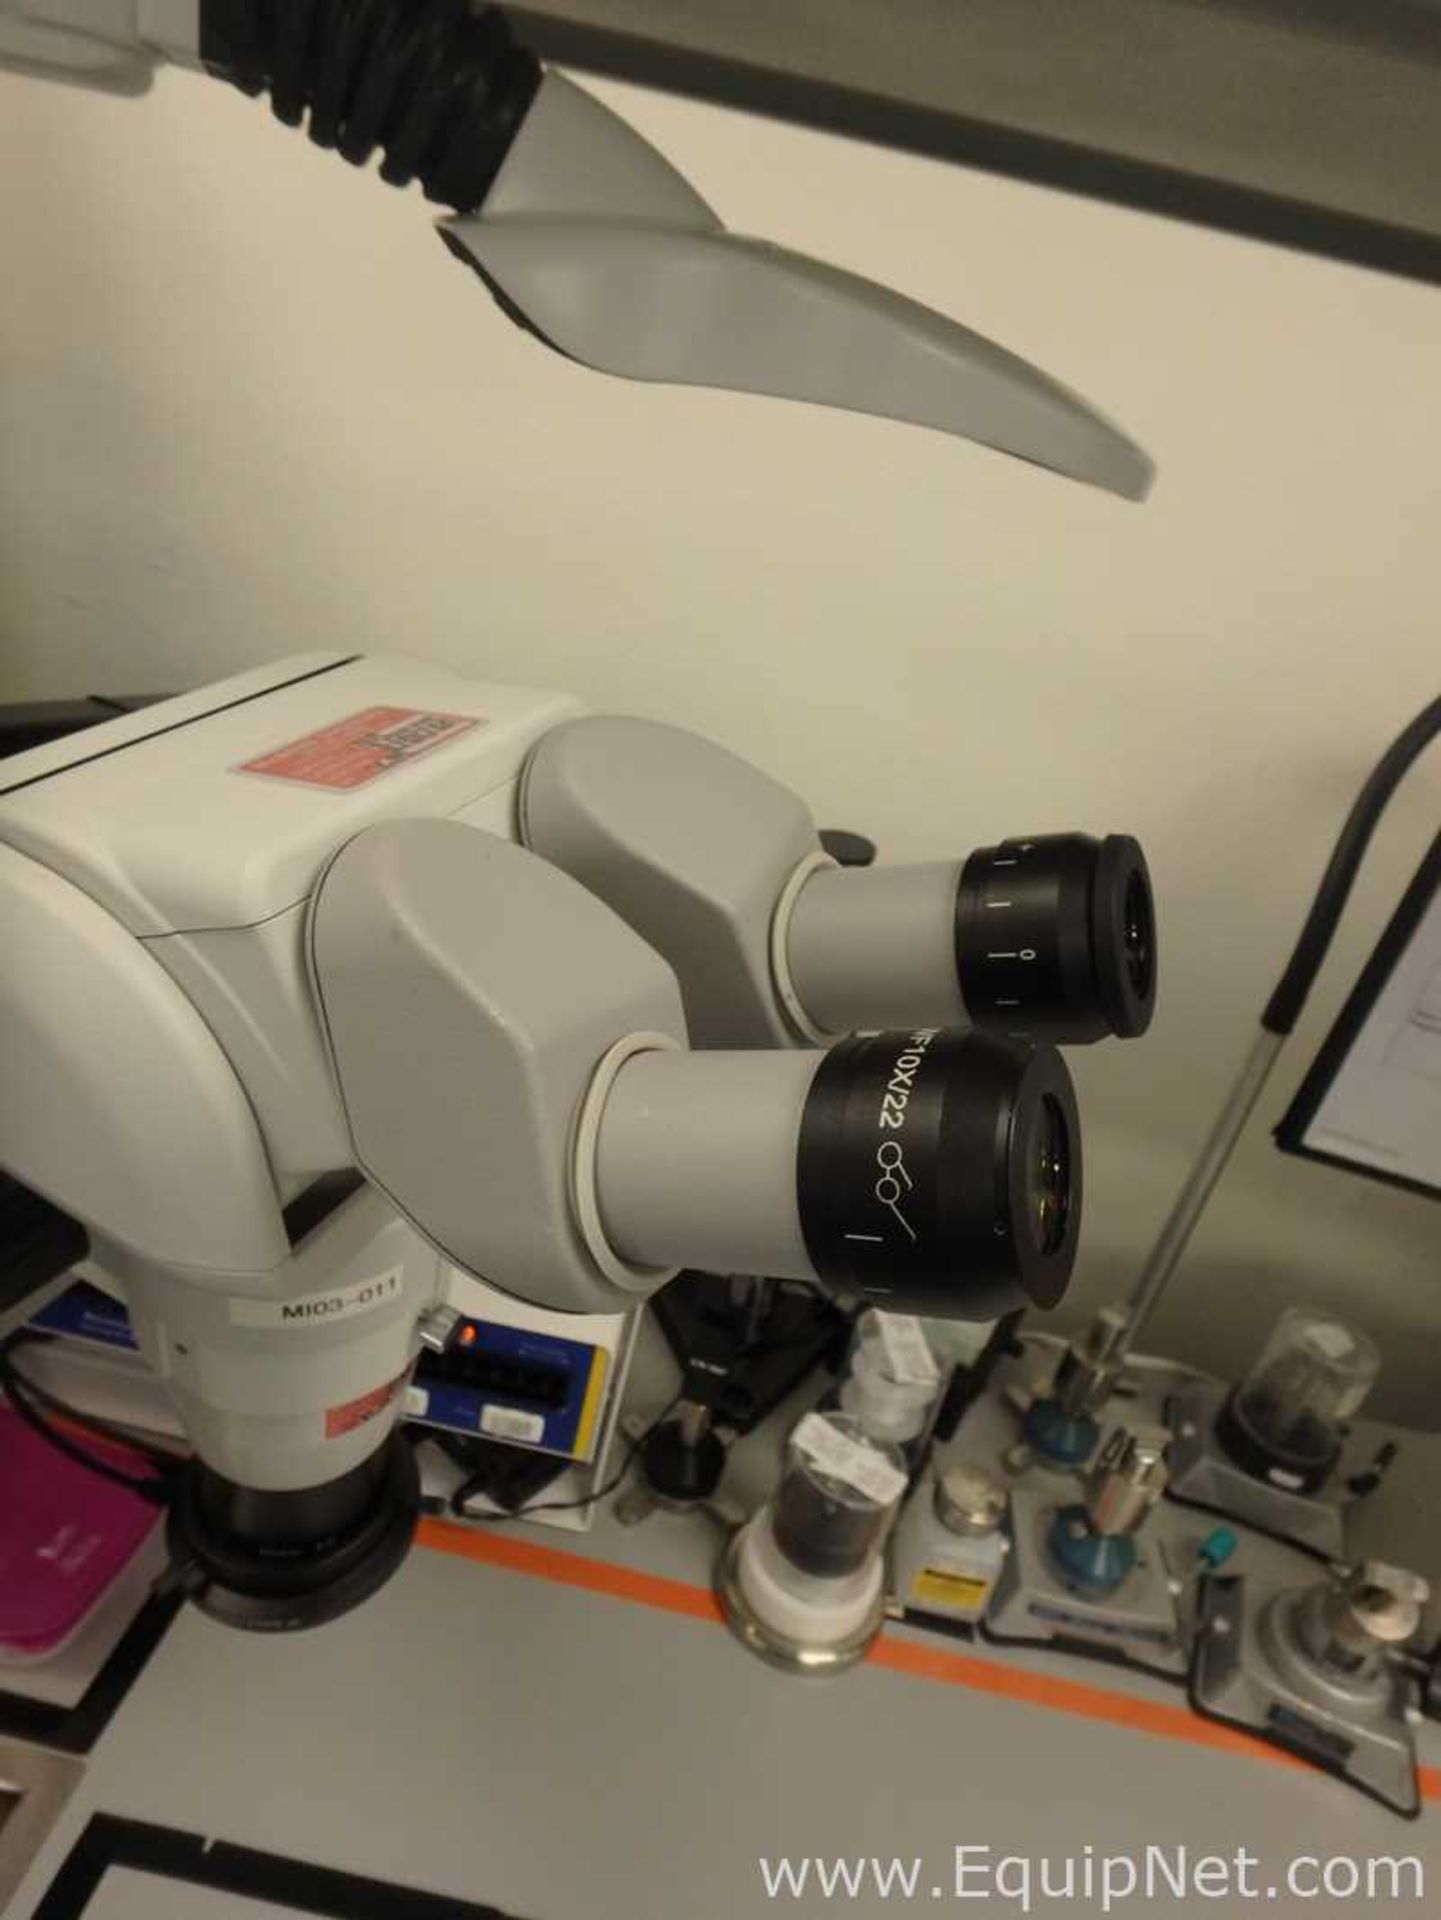 Boom Mounted Stereo Microscope - Image 6 of 12